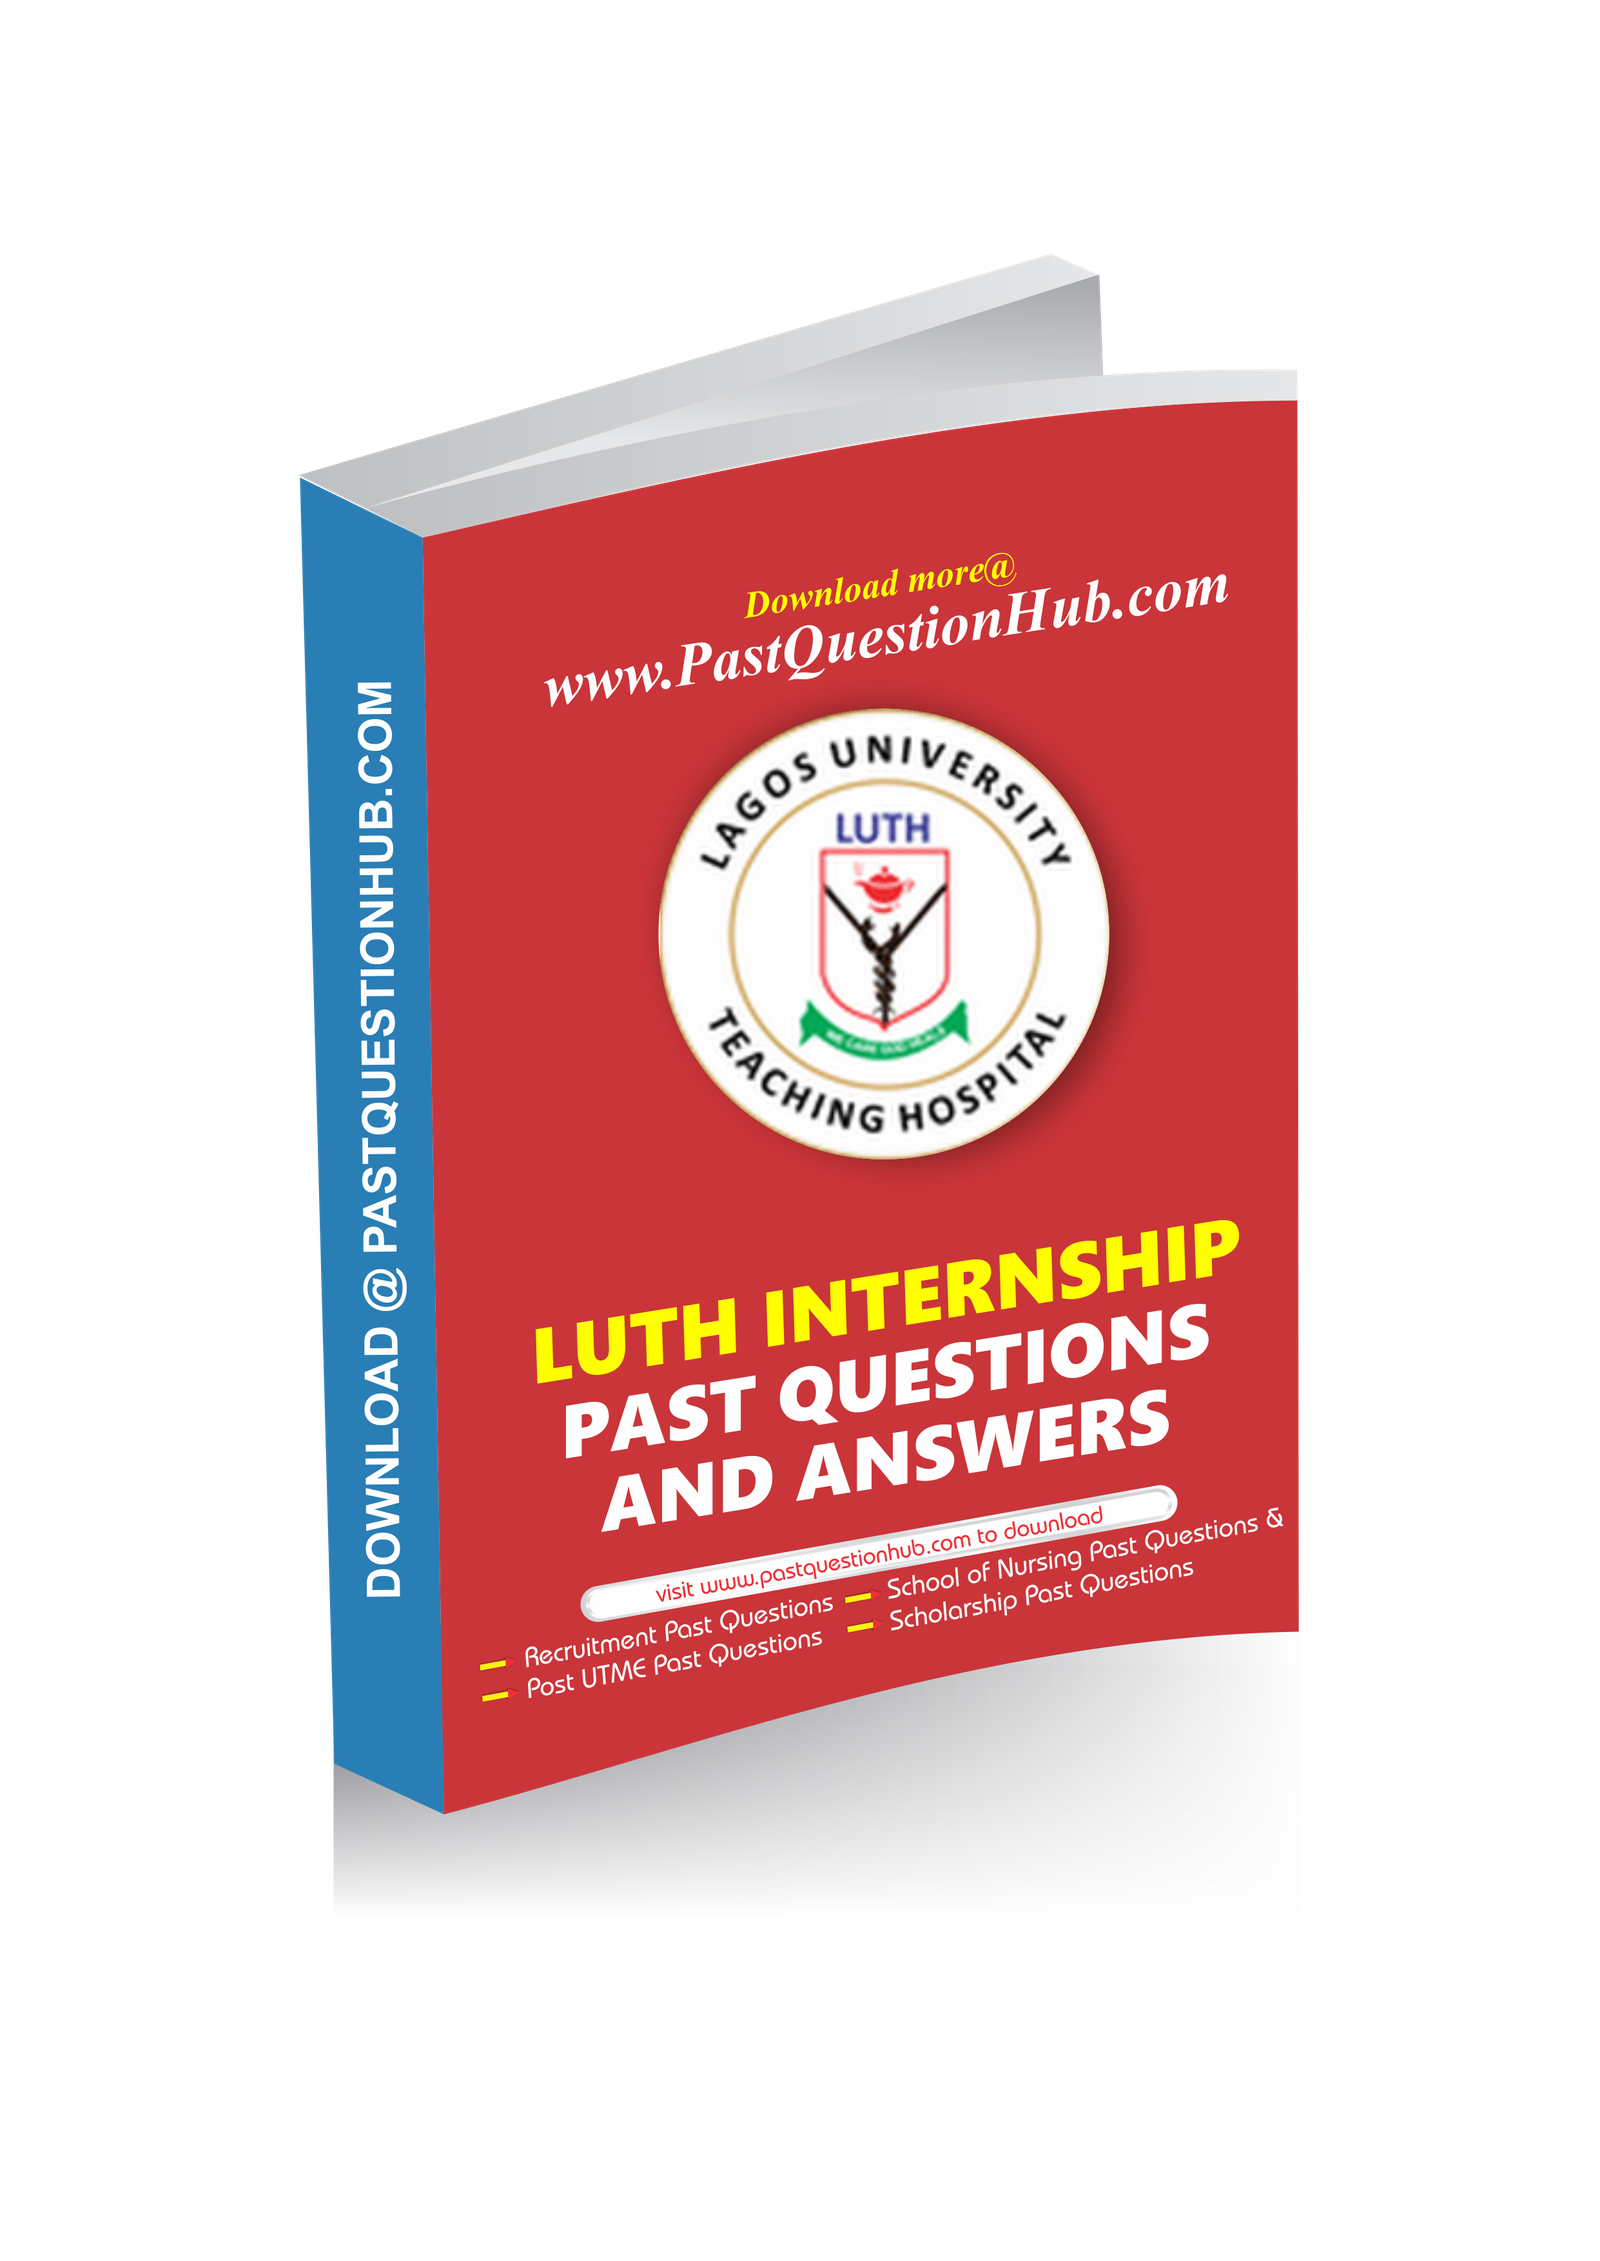 LUTH Internship past questions